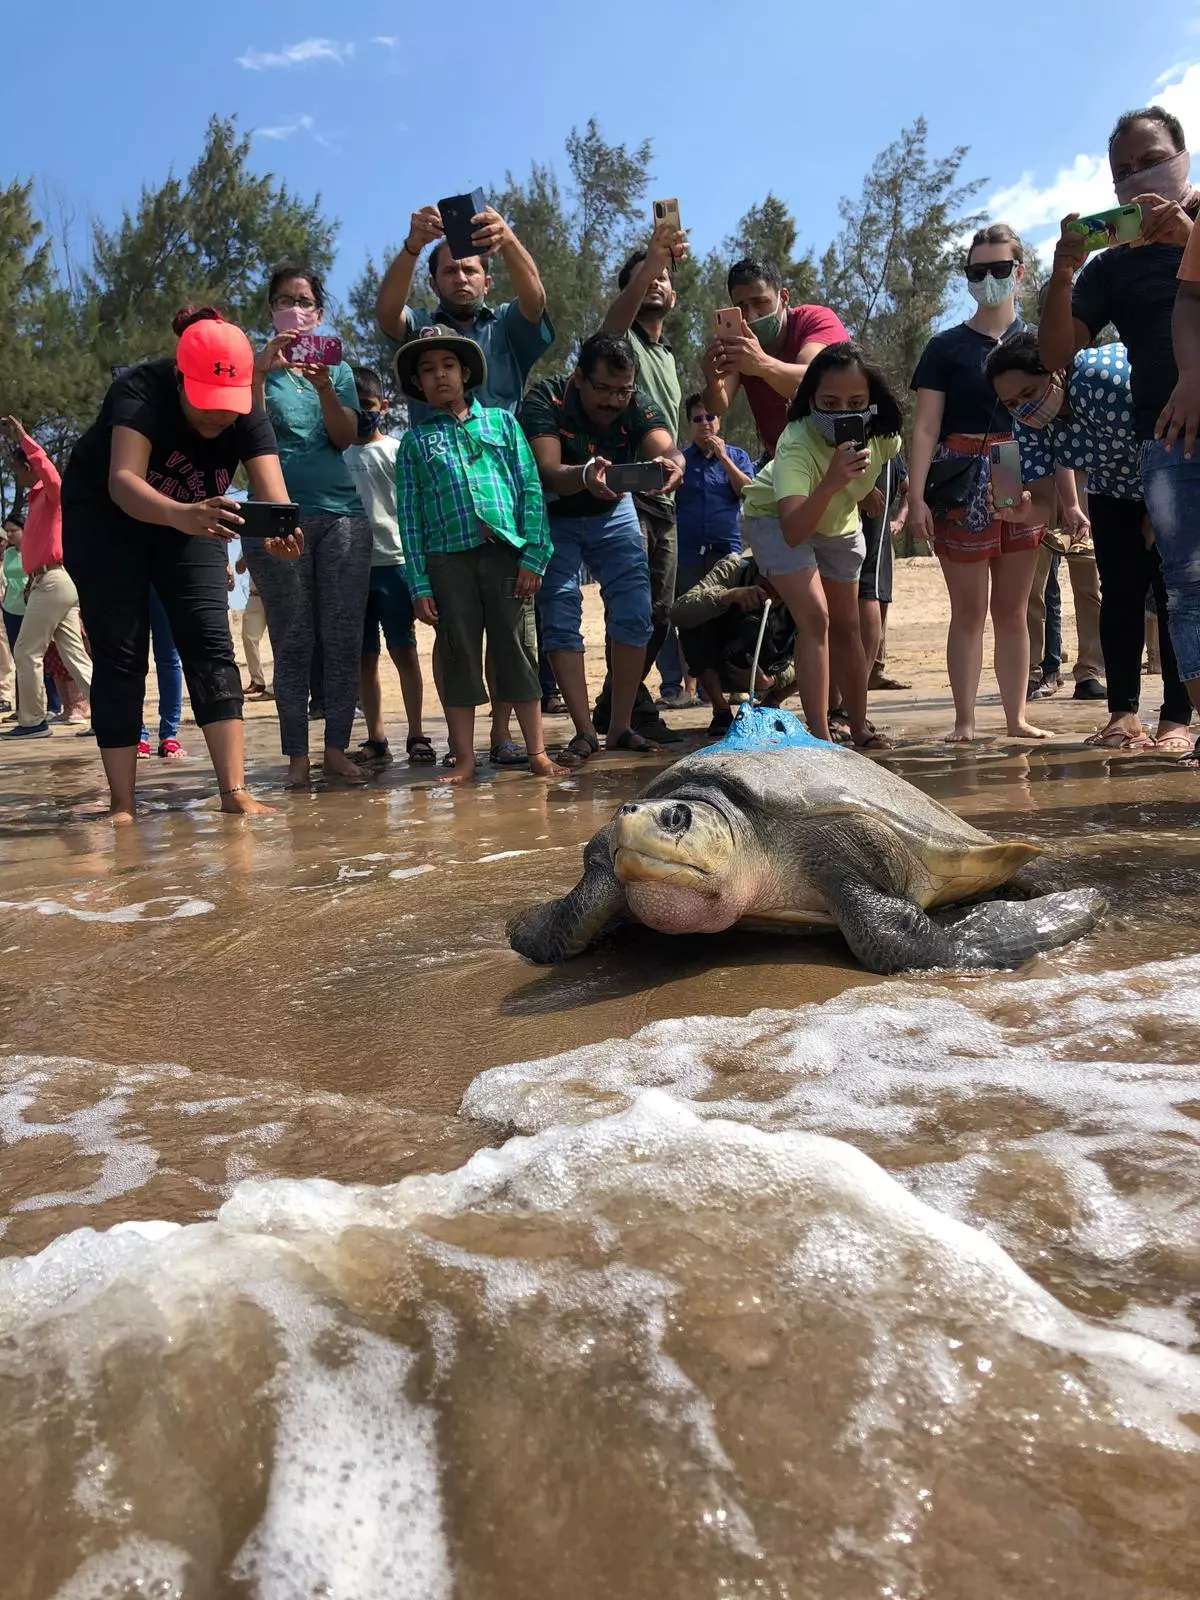 Anglers, pier staff, rescuers and beachgoers save 217-pound sea turtle  tangled in fishing line